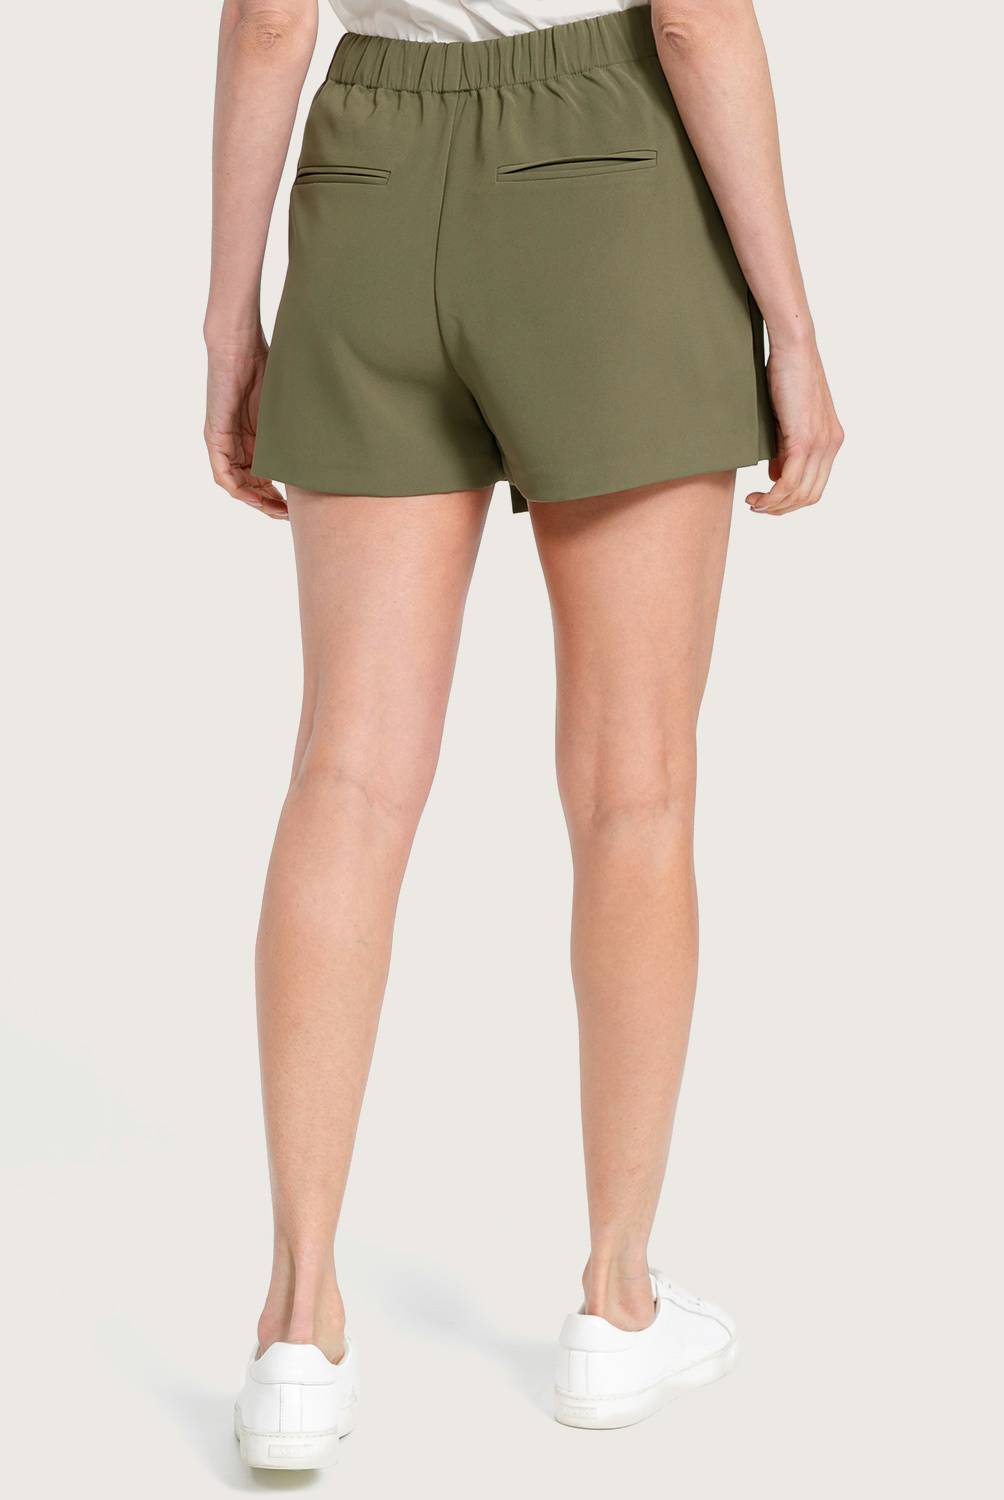 ONLY - Short Mujer